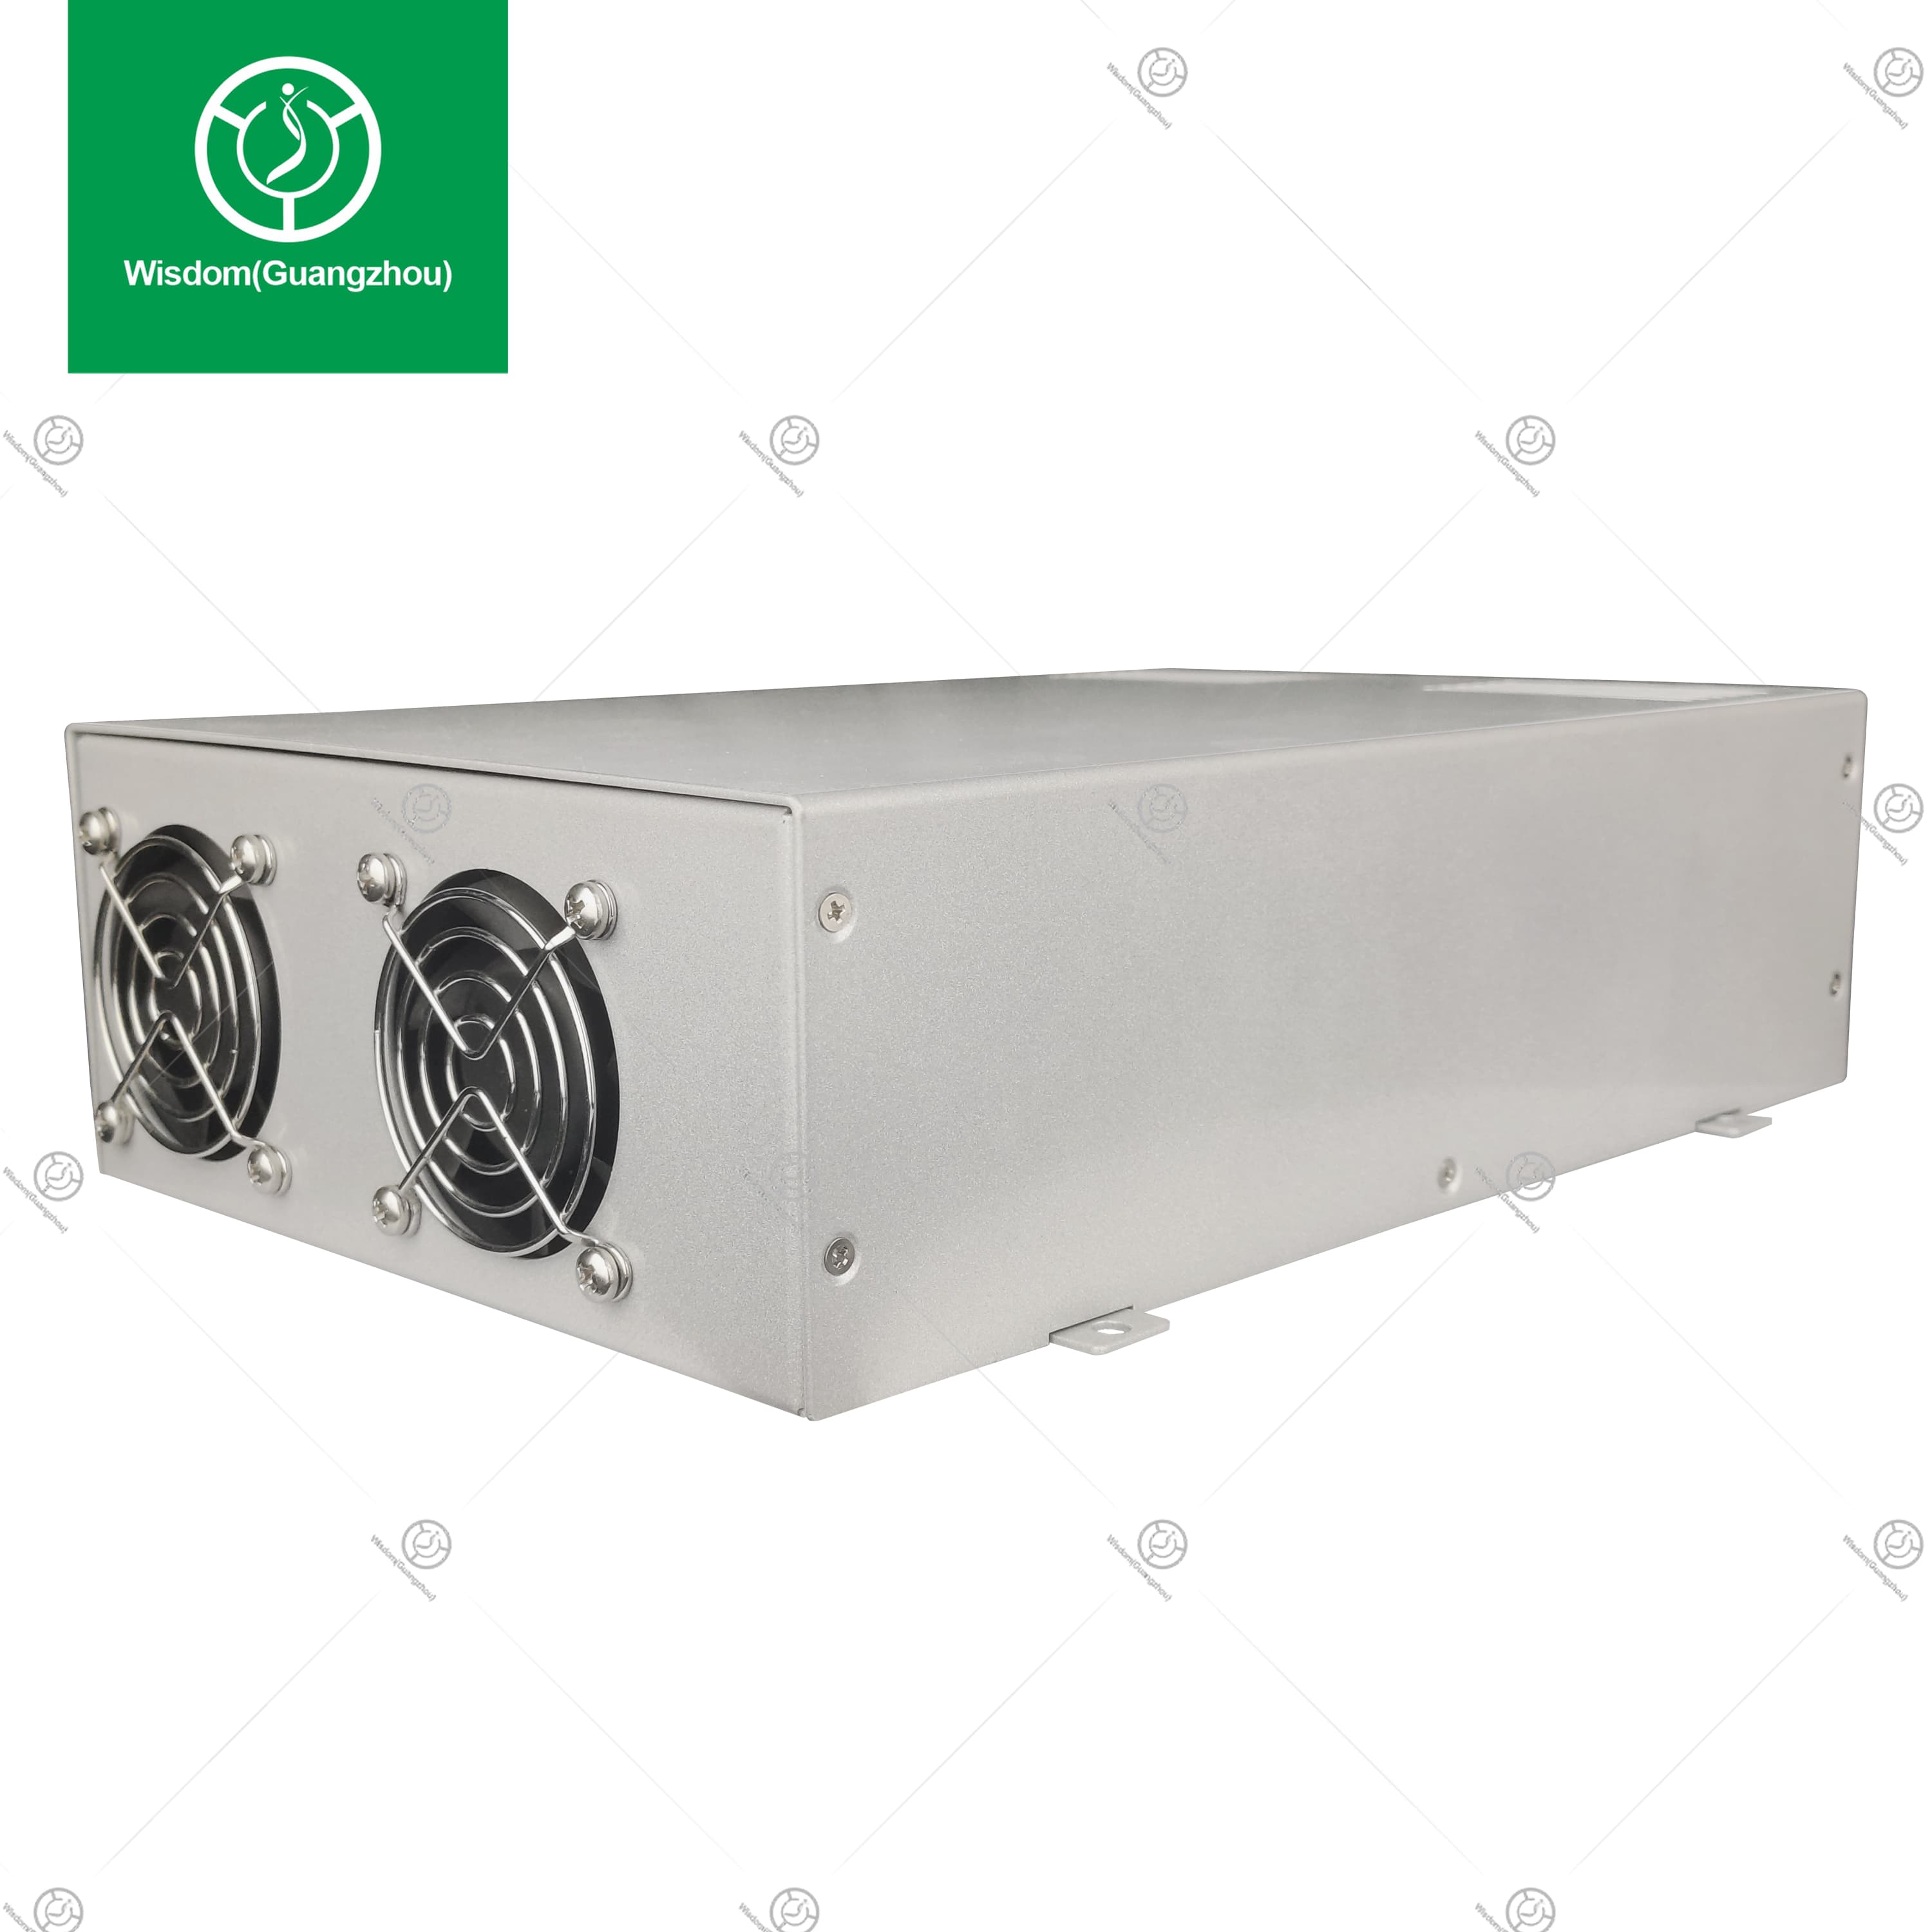 Power Supplies 4600W Diode Laser Hair Removal Part